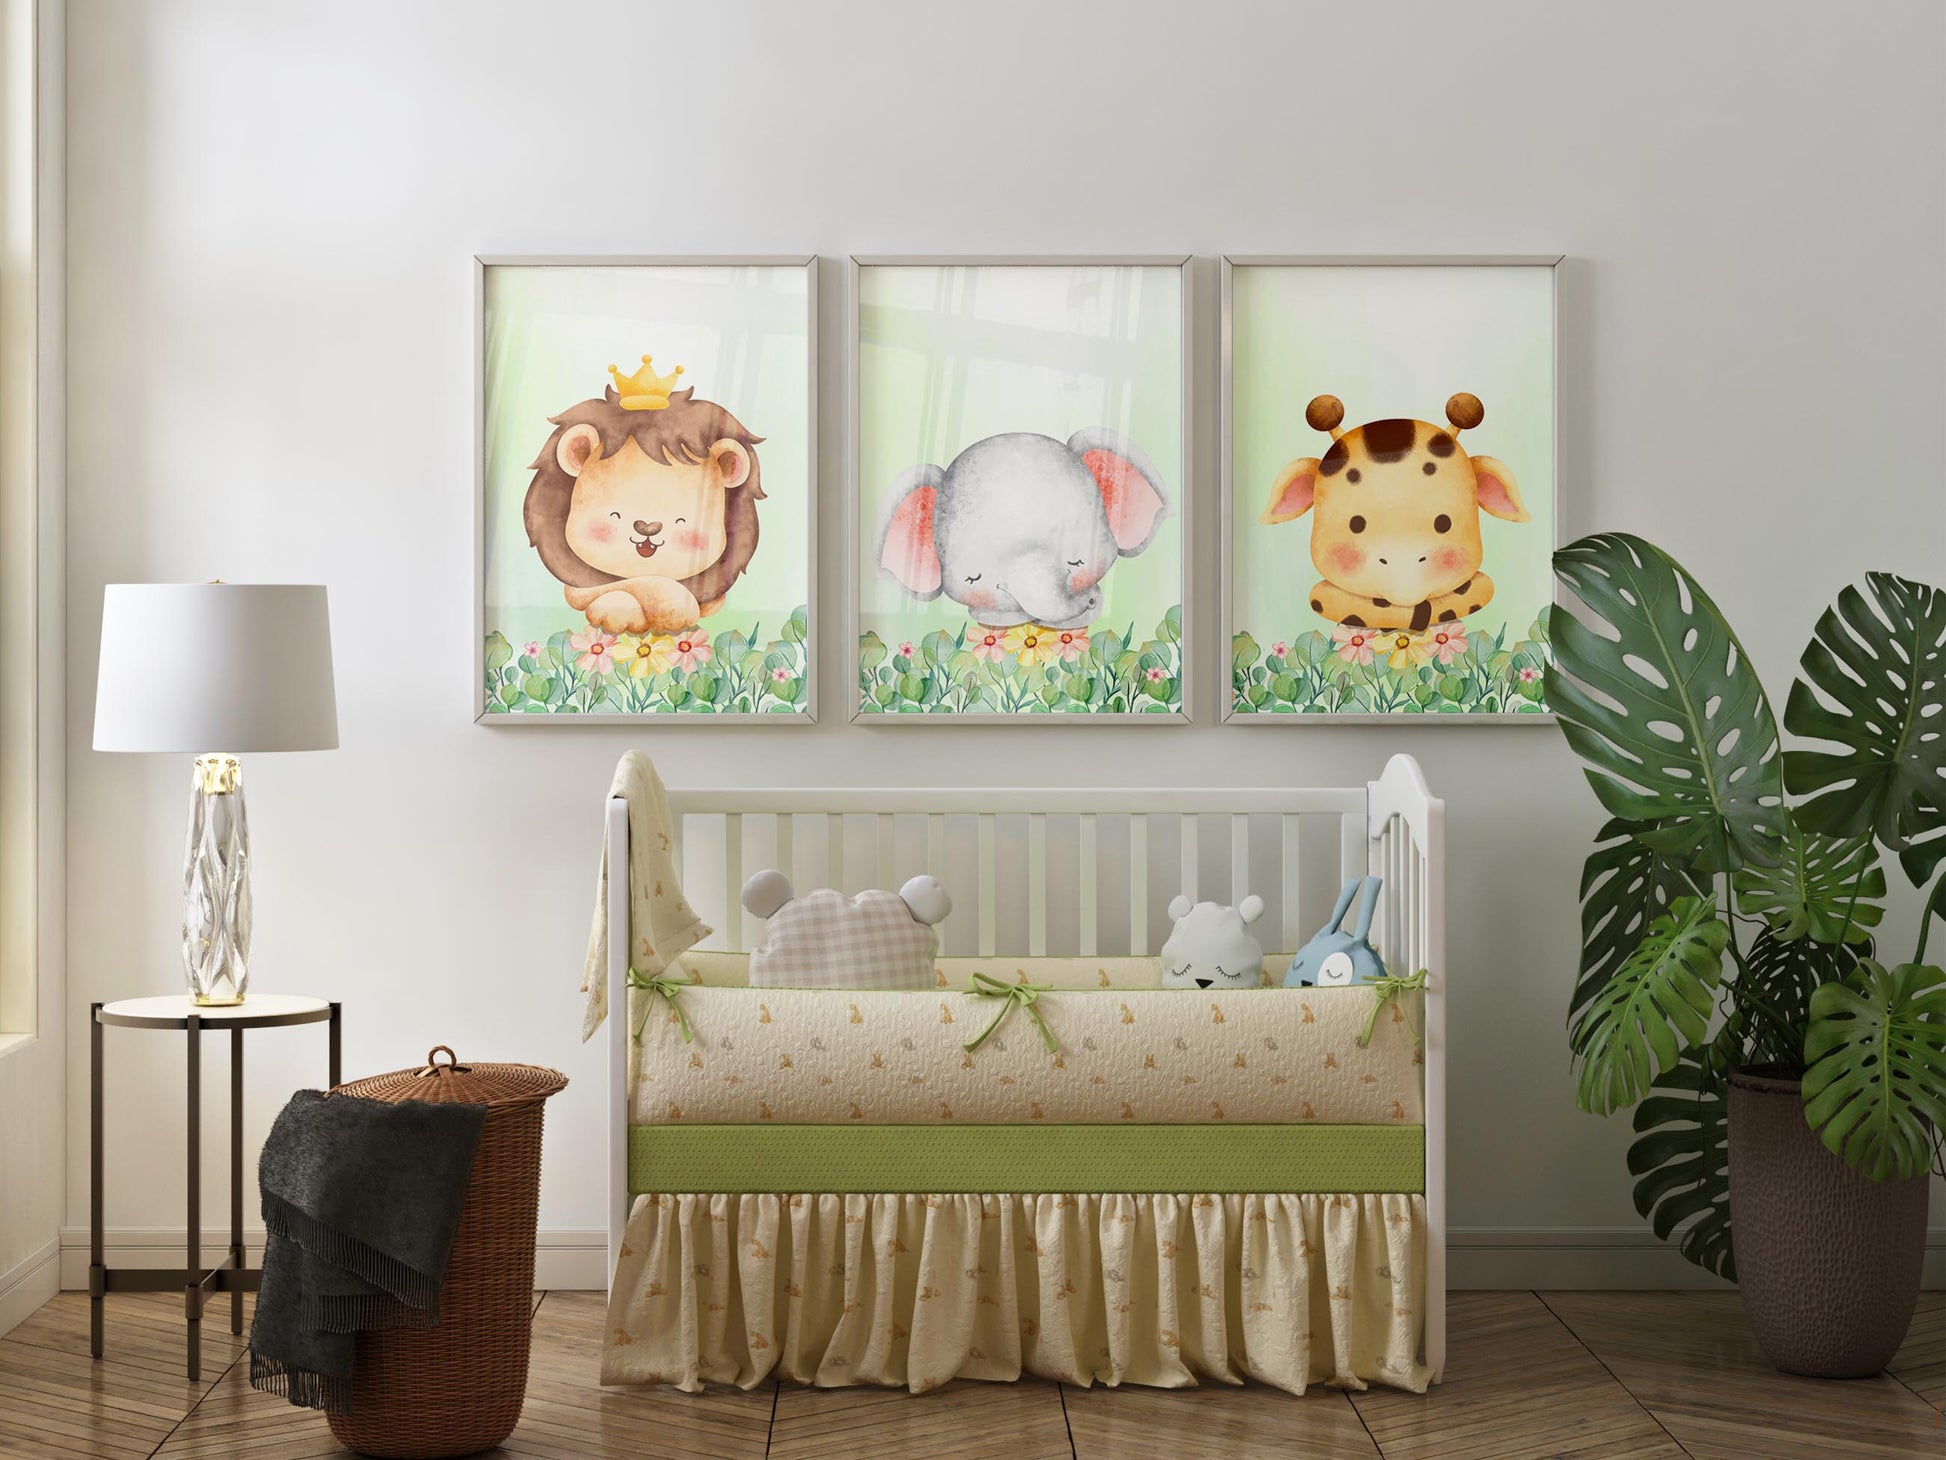 Set of 3 Personalized Animal Decor Prints for Initial Baby Shower.